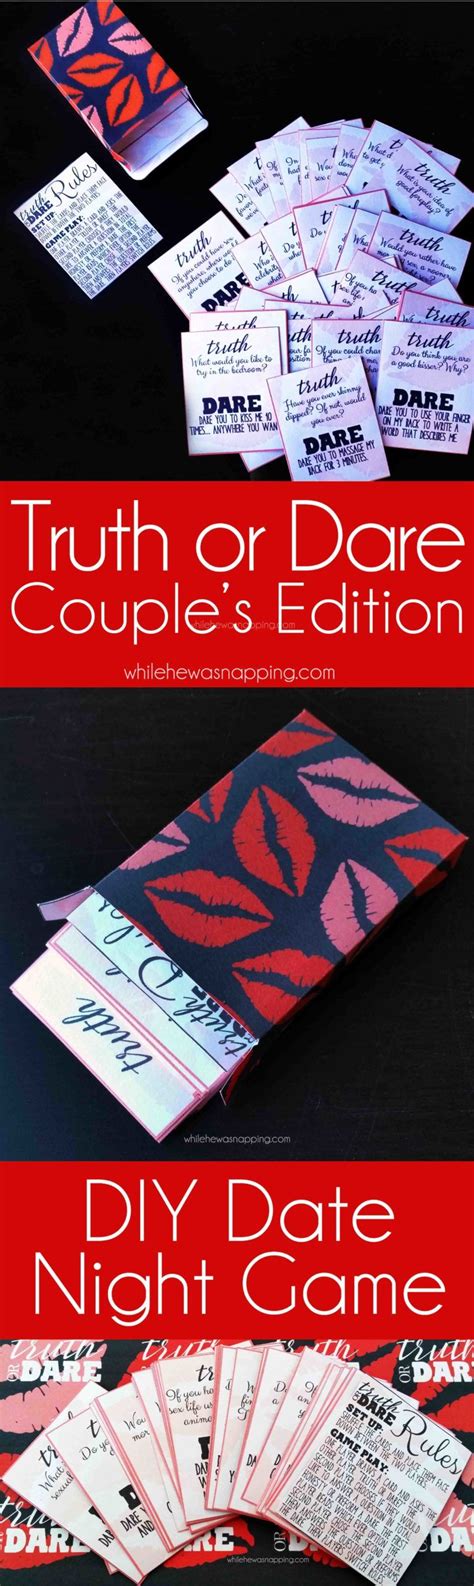 Couples Game Night Date Night Games Night Couple Diy Projects For